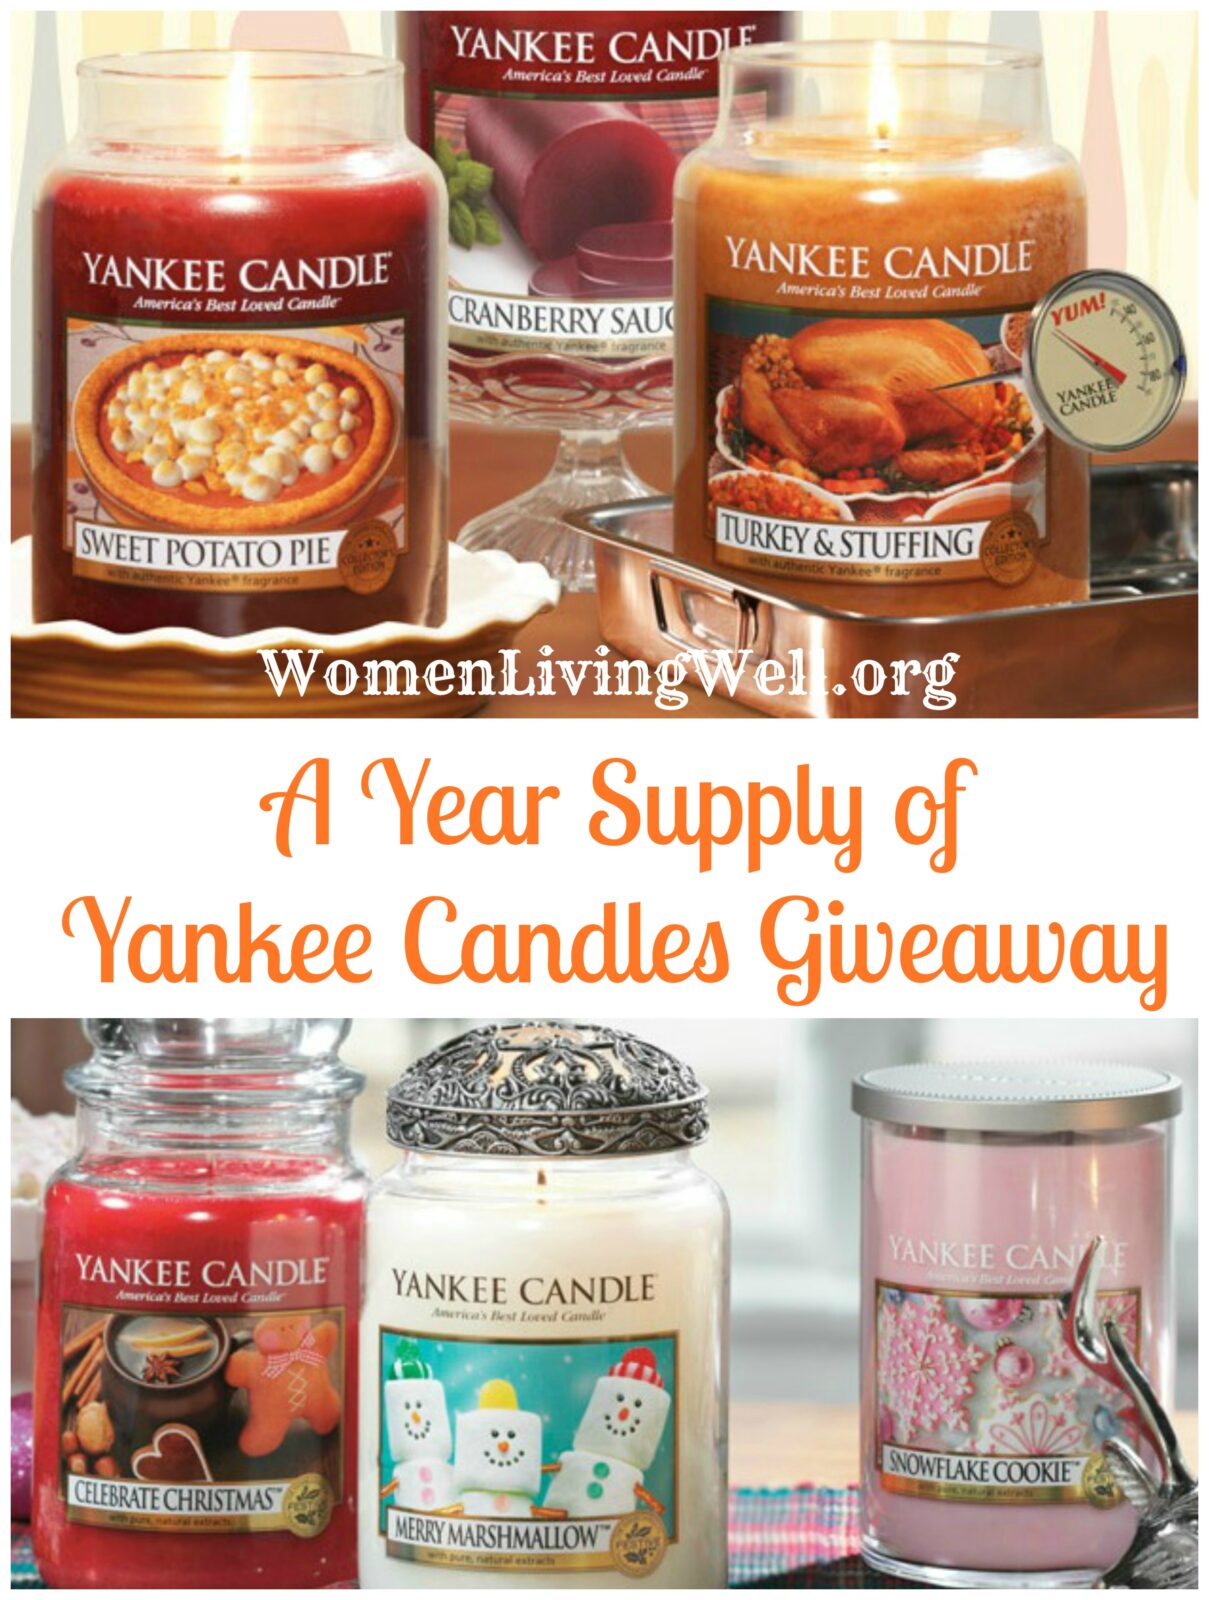 The Winner of the Yankee Candles Giveaway is…